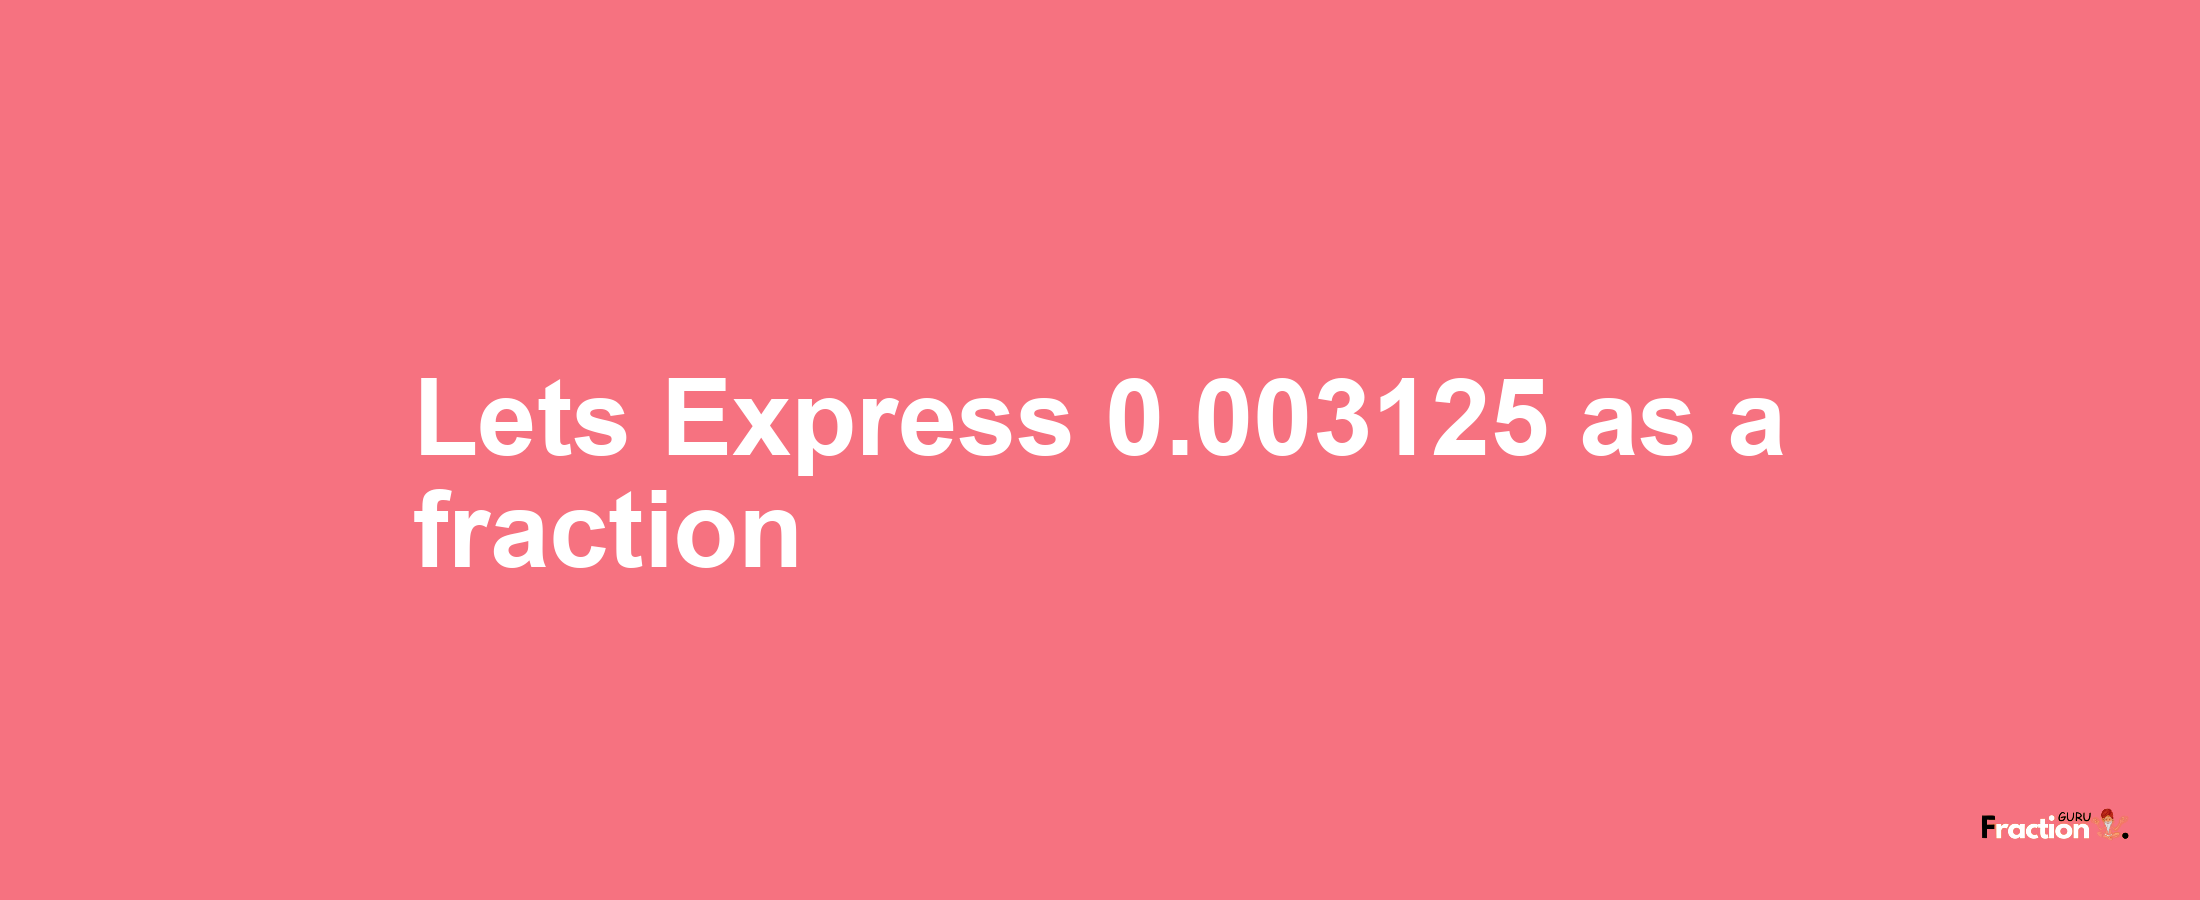 Lets Express 0.003125 as afraction